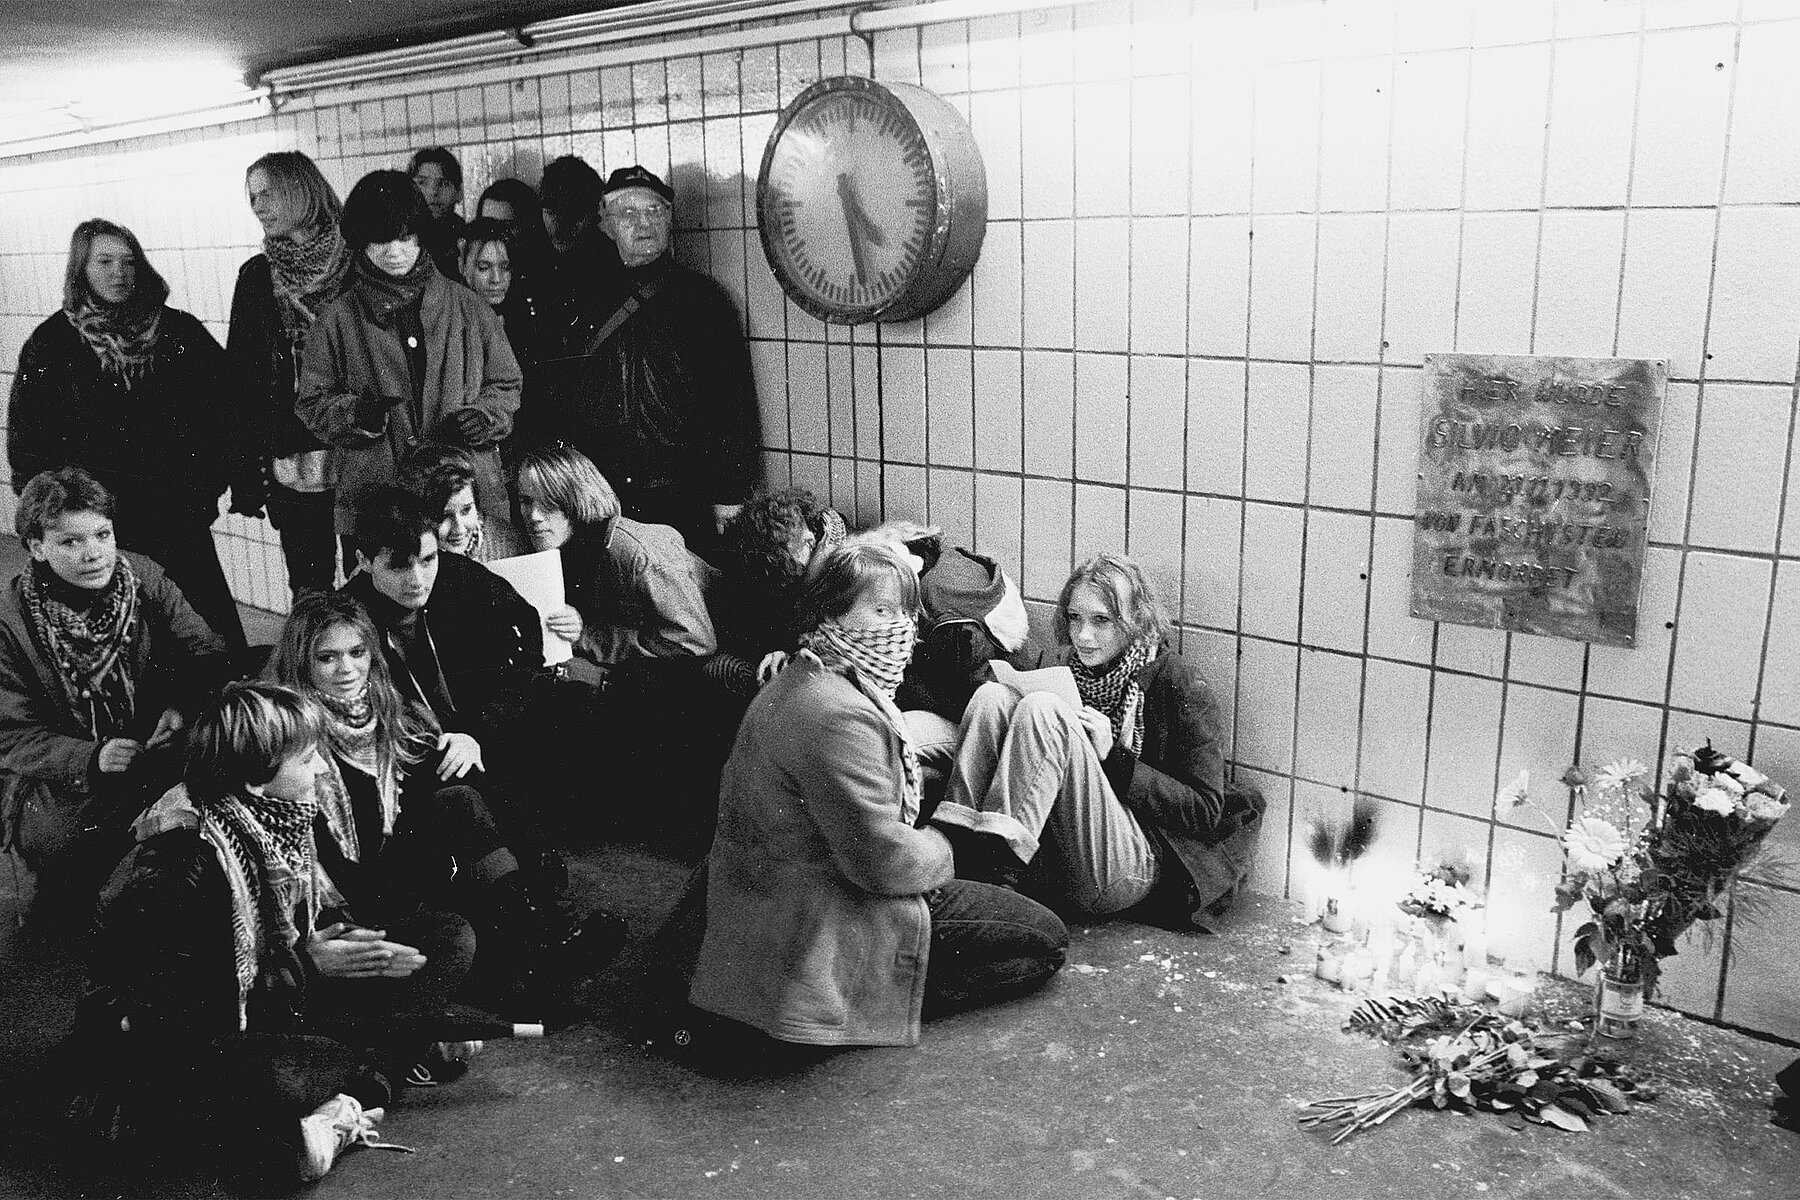 People stand and sit in front of the memorial plaque for Silvio Meier in the subway station. In front of the memorial plaque are flowers and candles.